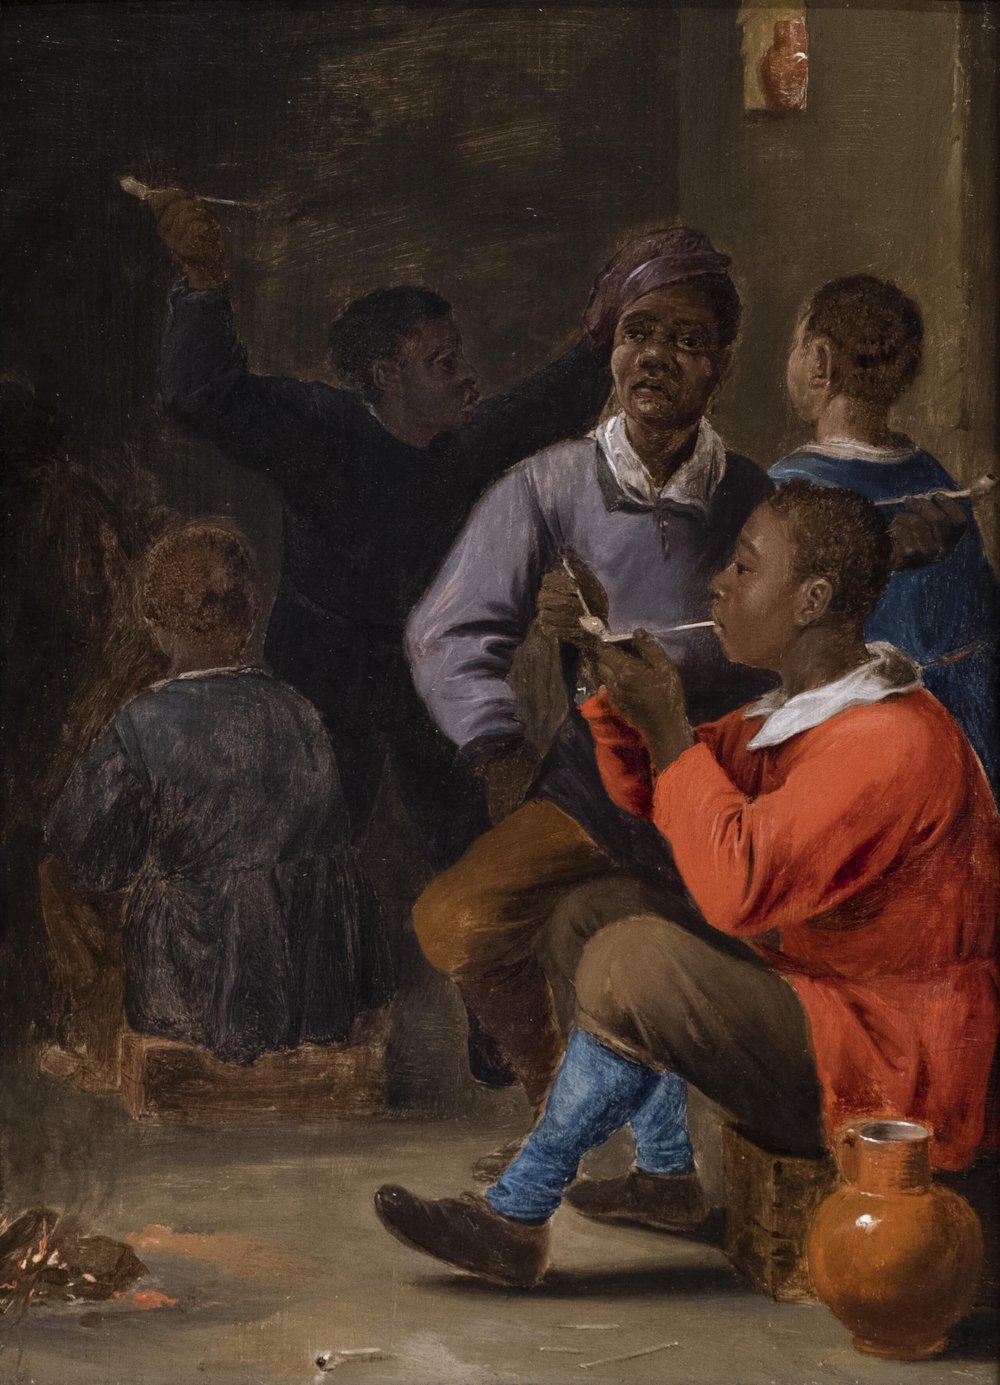   Black Men and Women in a Tavern   oil on wood, 1650  workshop of David Teniers the Younger 